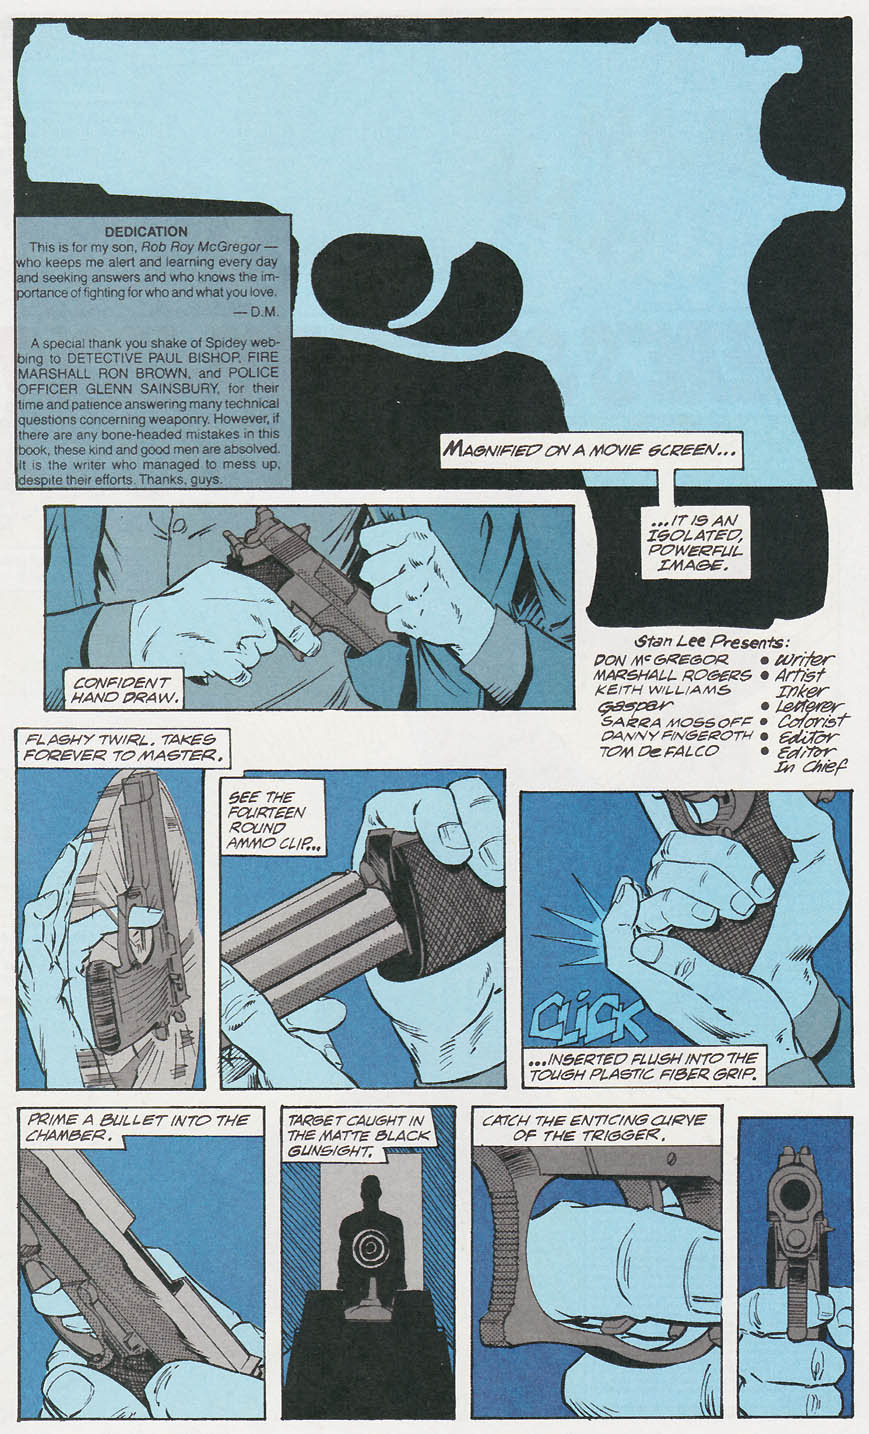 Spider-Man (1990) 27_-_Theres_Something_About_A_Gun_Part_1 Page 1